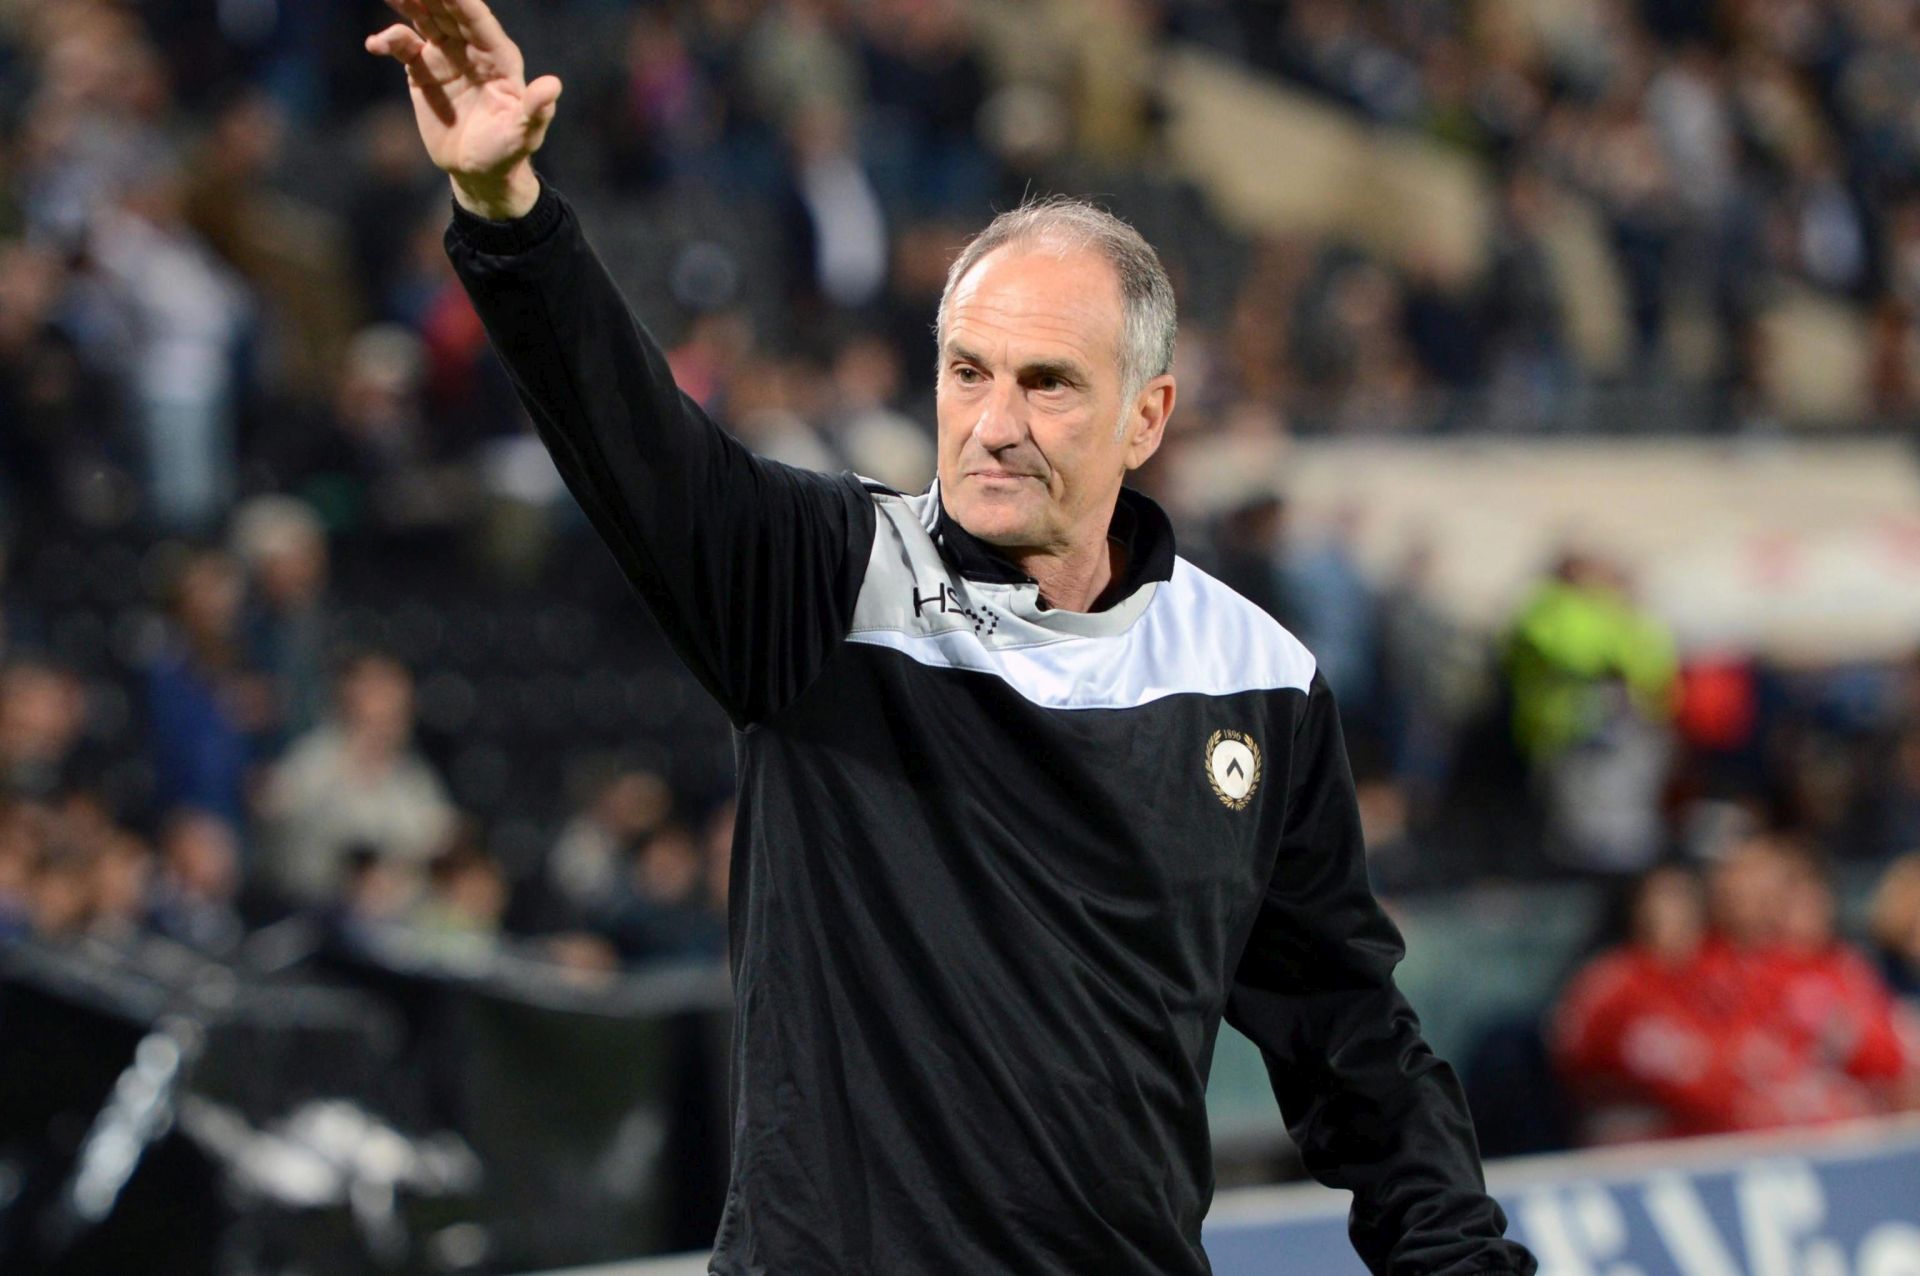 epa05109327 (FILE) A file photo dated 17 May 2014 Udinese's coach Francesco Guidolin waves supporters at the end of the Italian Serie A soccer match Udinese Calcio vs UC Sampdoria at Friuli stadium in Udine, Italy. Francesco Guidolin will be head coach at Swansea City until the end of the season, the club announced on 18 January 2016. Guidolin will work with interim manager Alan Curtis - who replaced Garry Monk last month after Monk's firing - and will also have final say on team selection, the Premier League club said 18 January 2016.  EPA/LANCIA